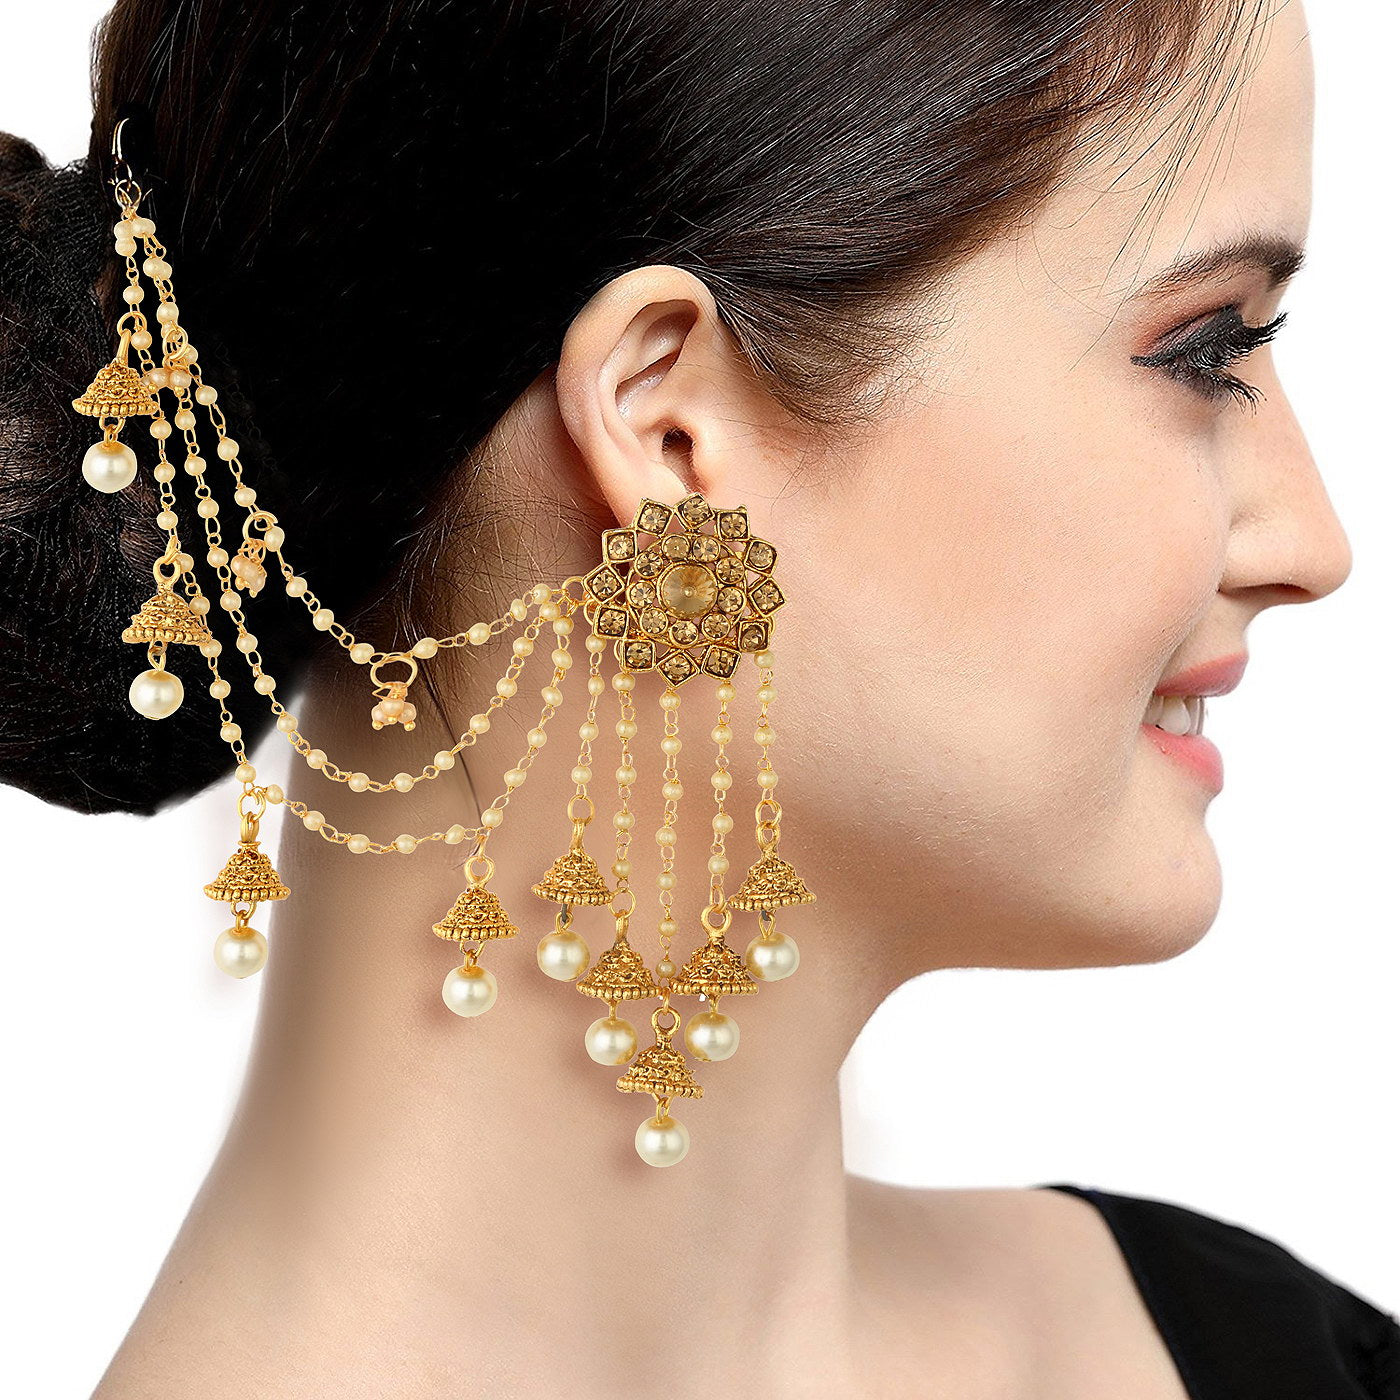 Priyaasi Ethnic Peacock Jhumka Earrings for Women  GoldPlated  Pearl  Drop  Kemp Stone Earrings with Hair Chain  Pushback Closure  Brass Metal   Chain Earrings for Wedding Puja Festivals  Amazonin Fashion